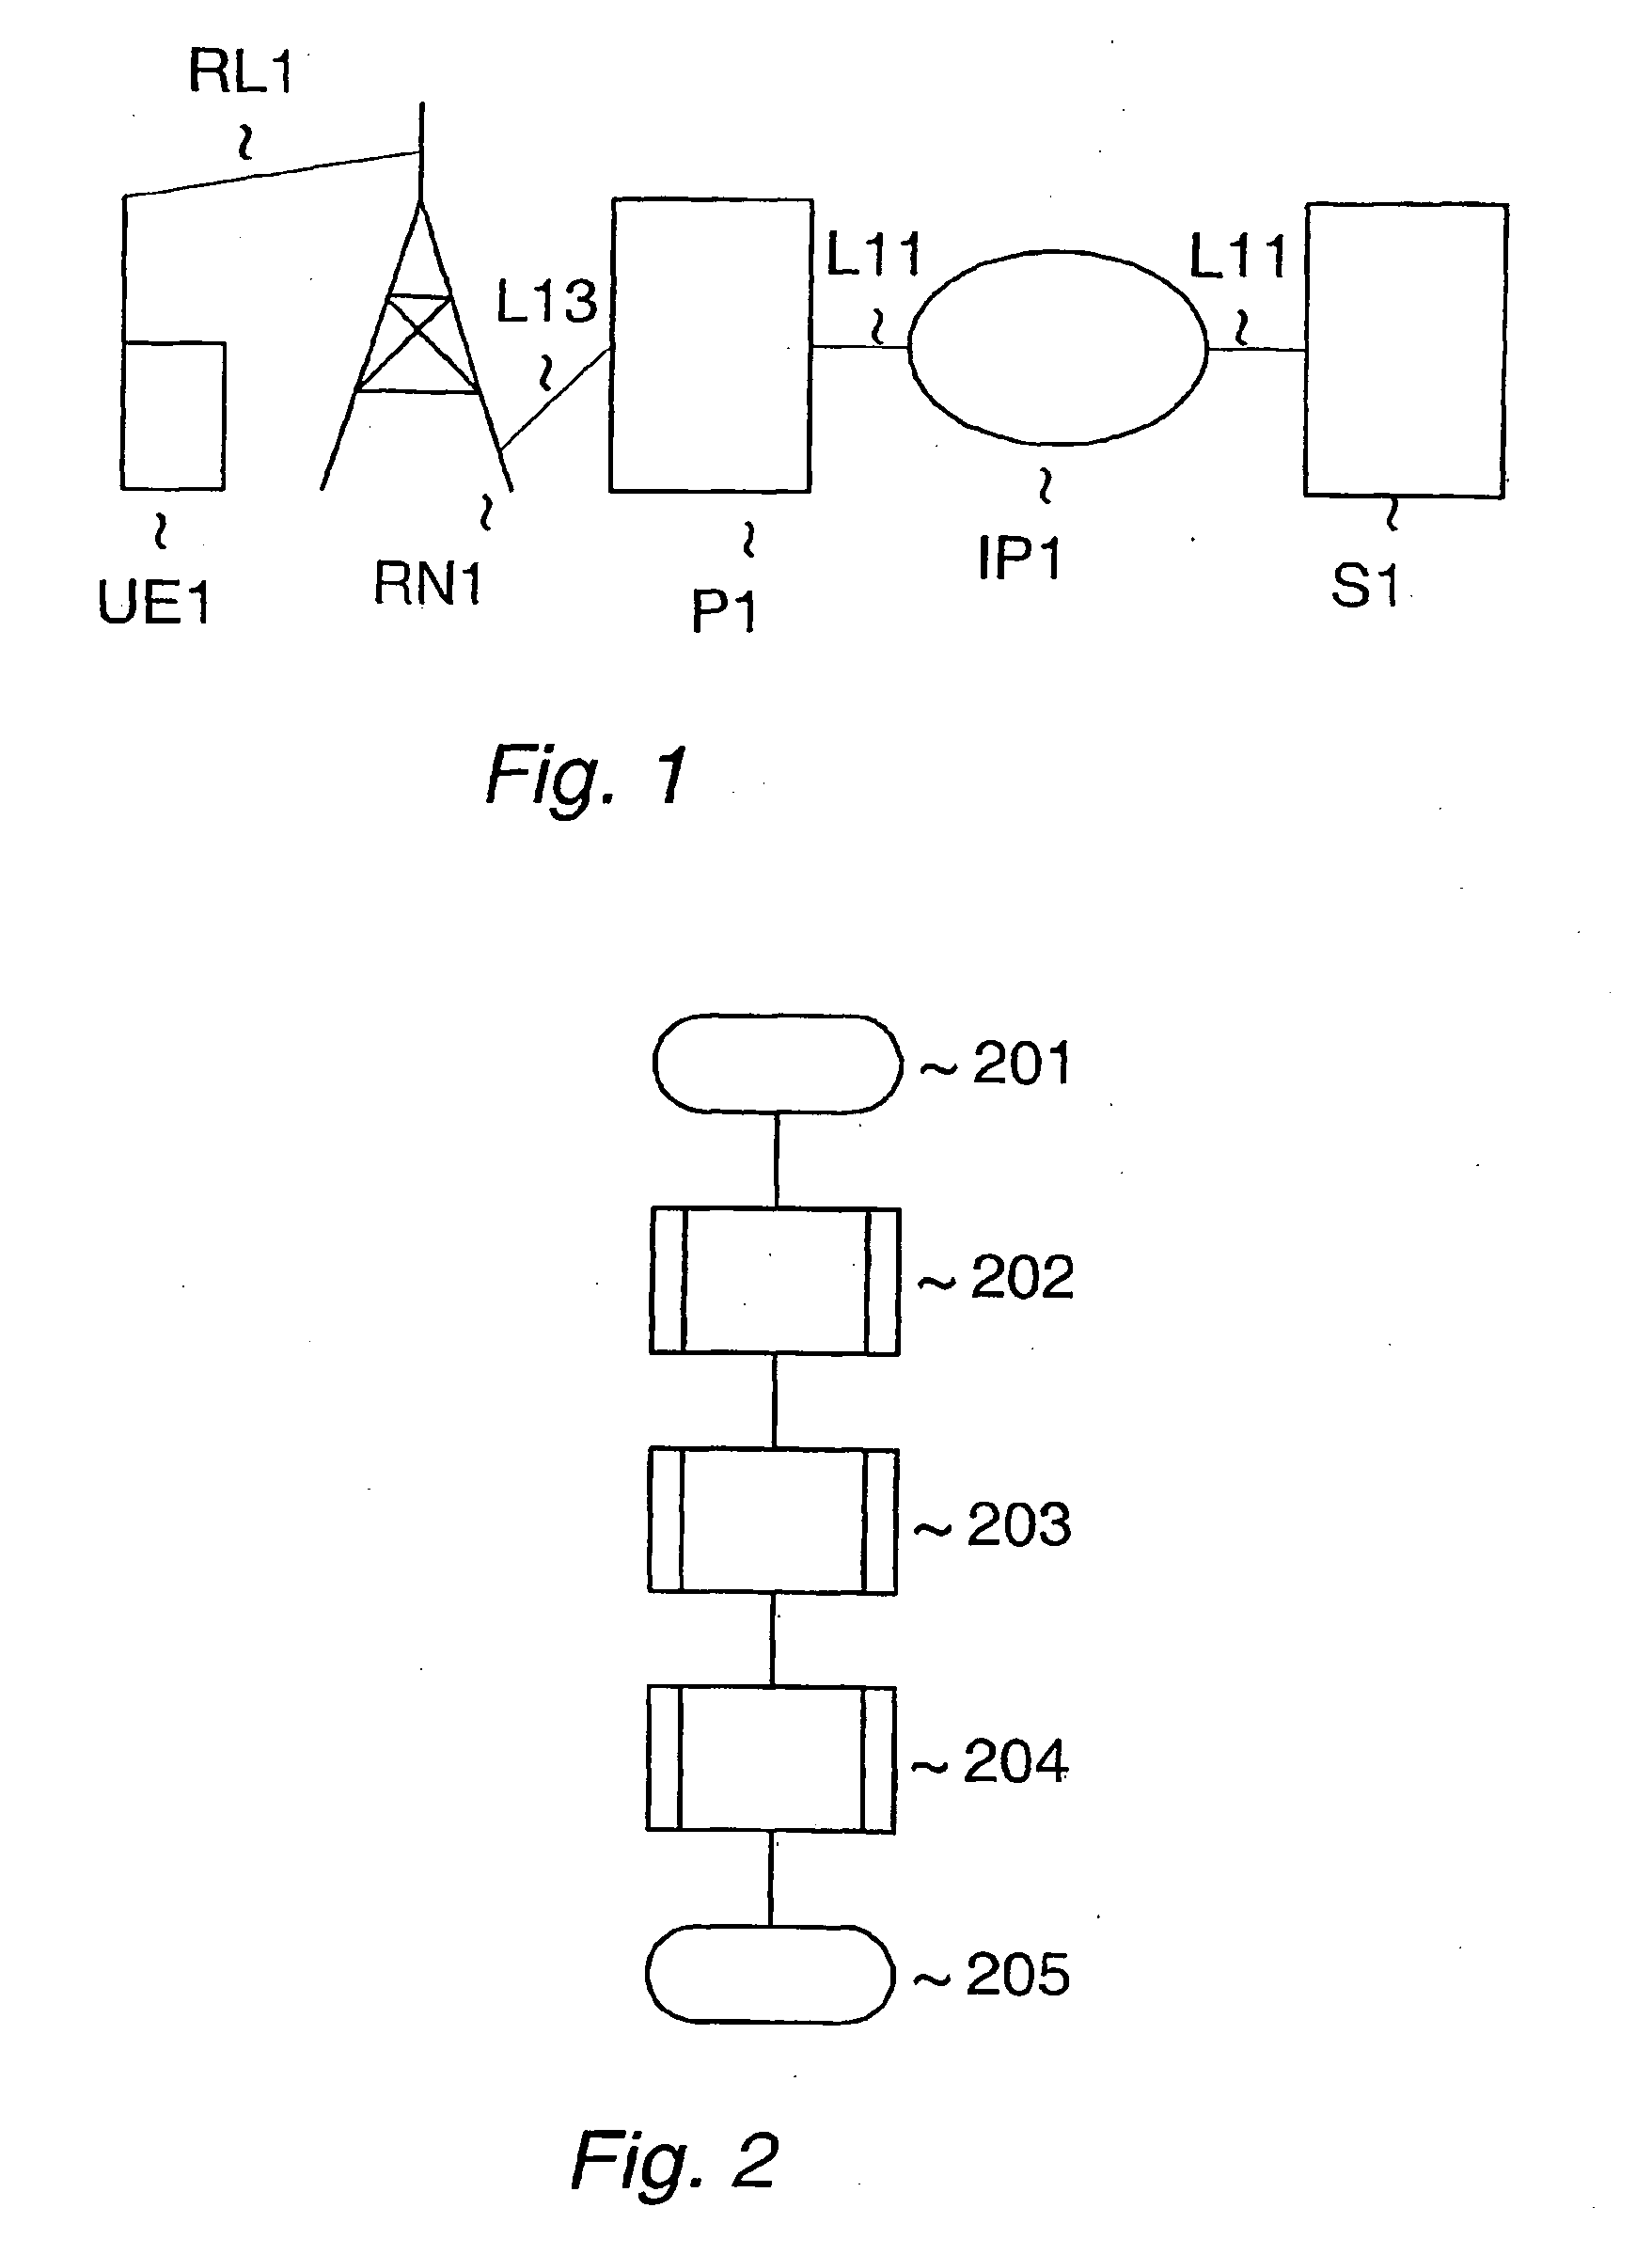 Method for calculating a transmission window size